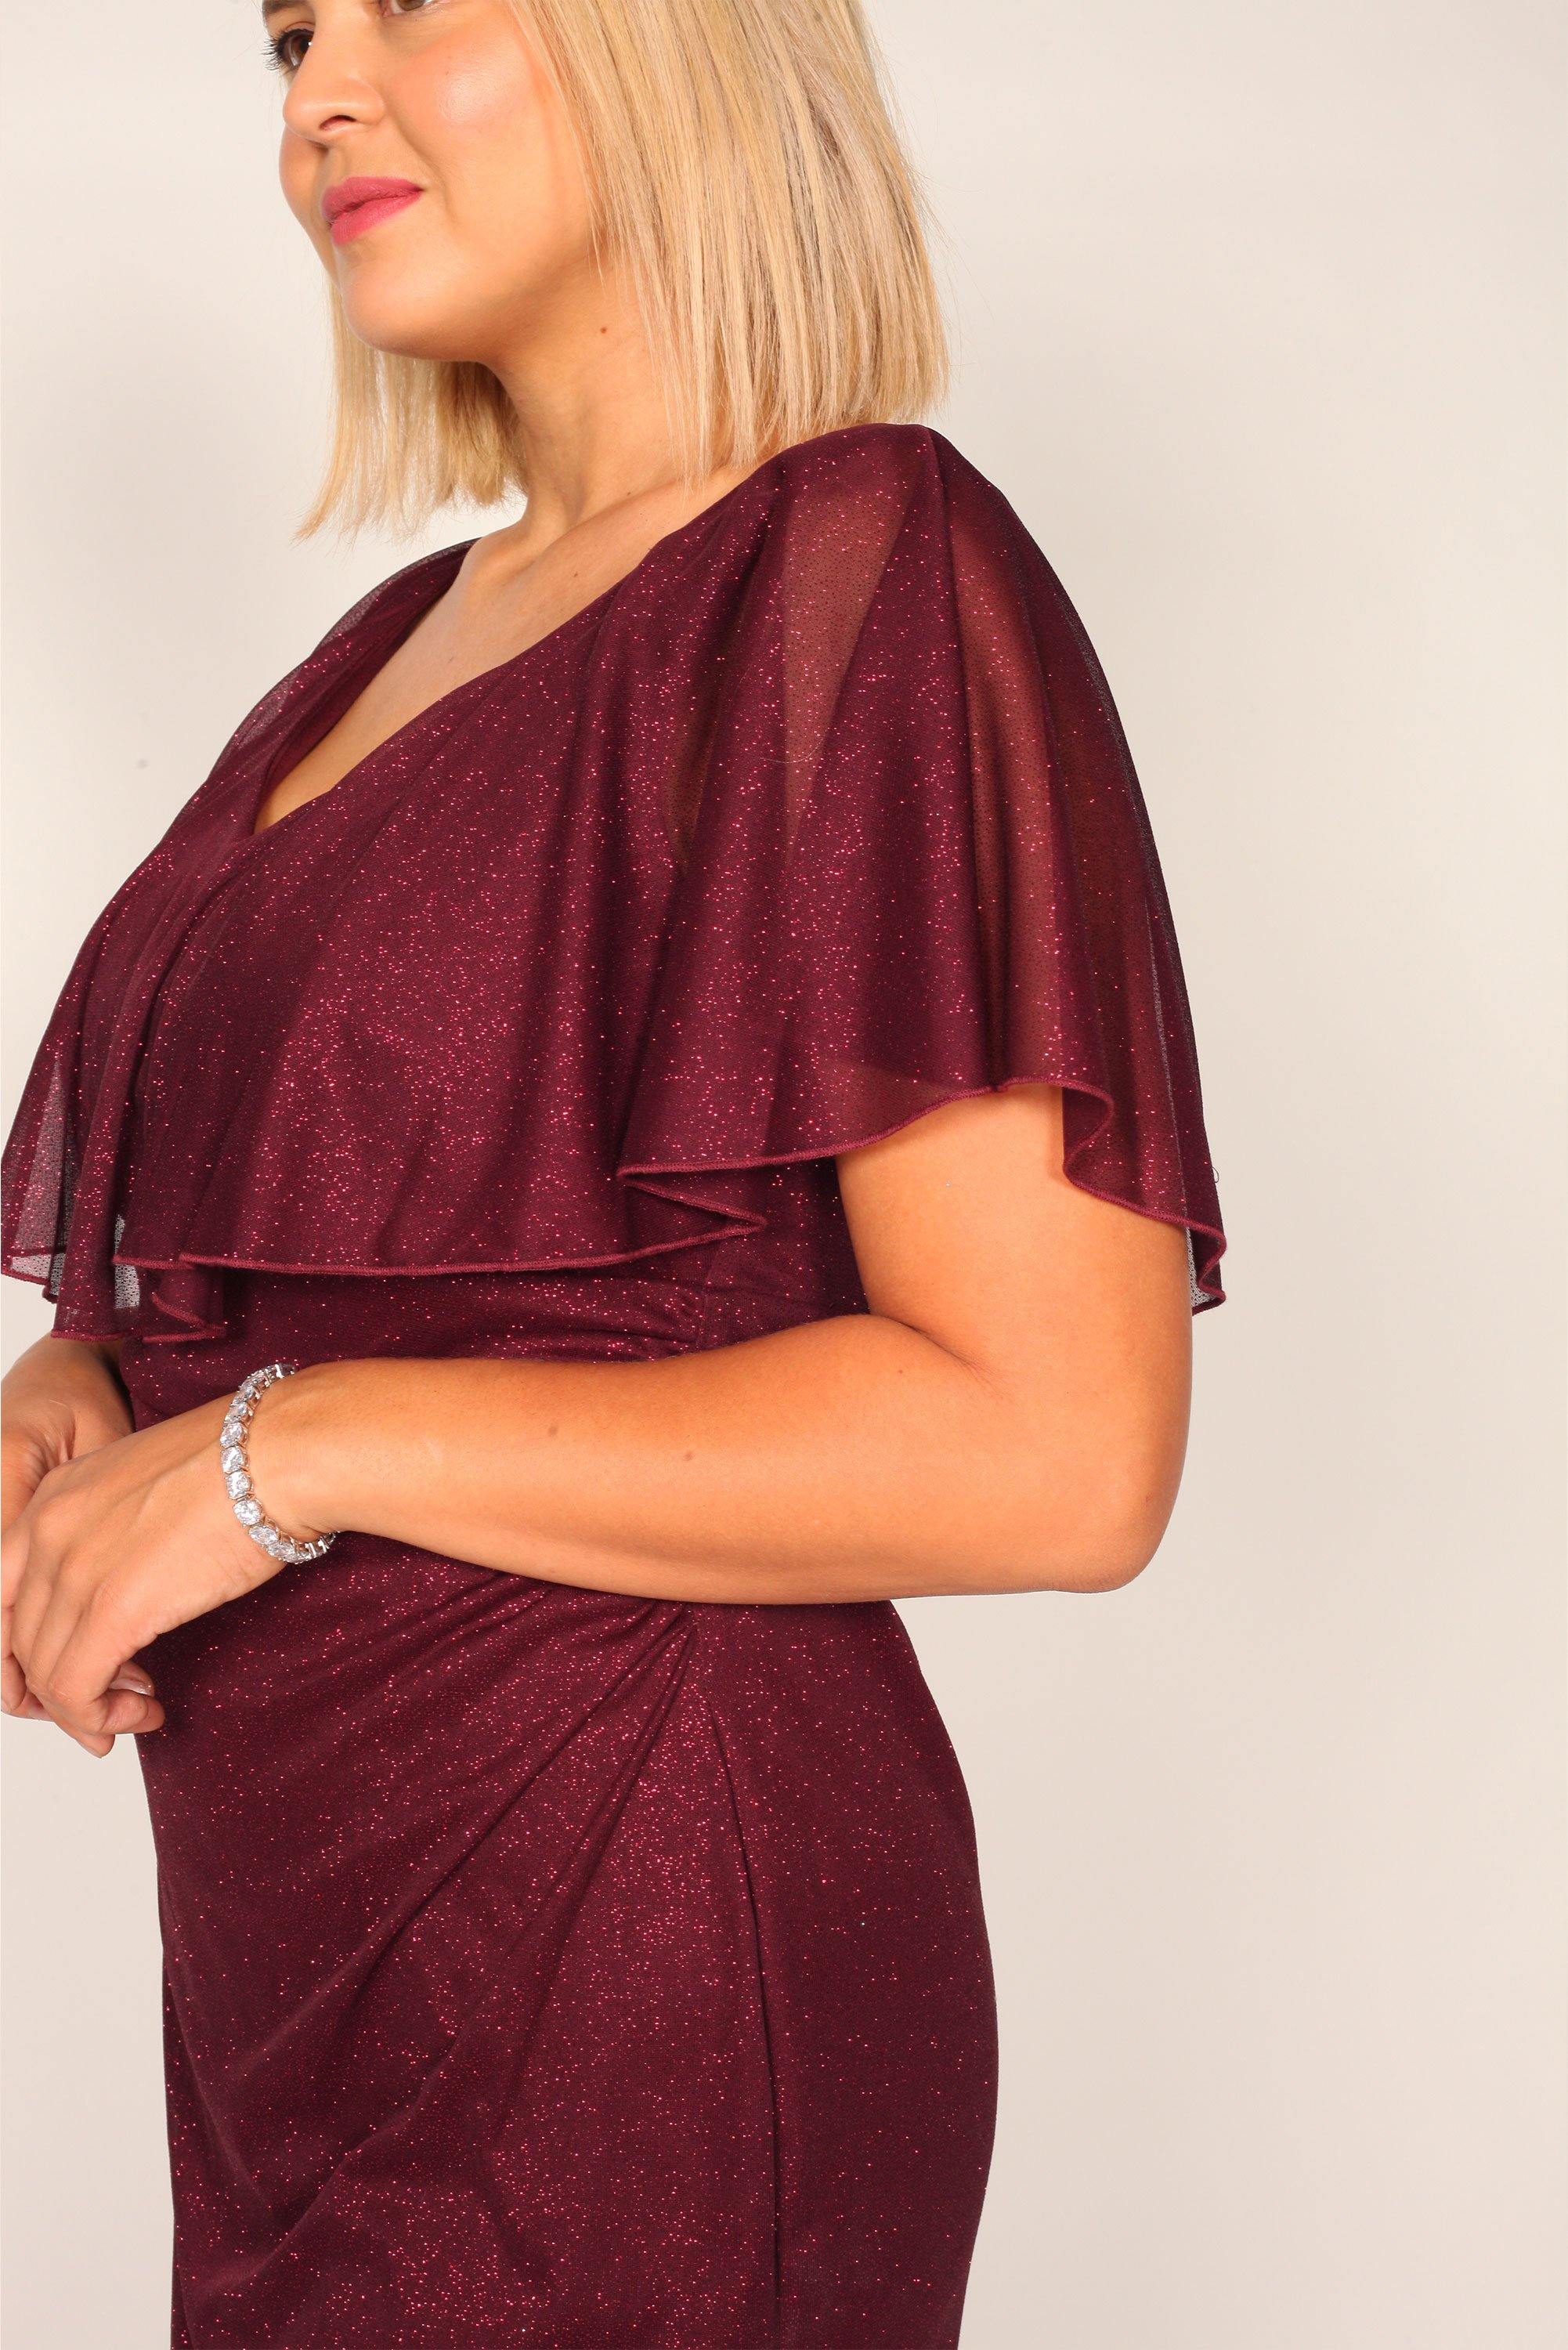 Connected Apparel Formal Short Cocktail Dress - The Dress Outlet